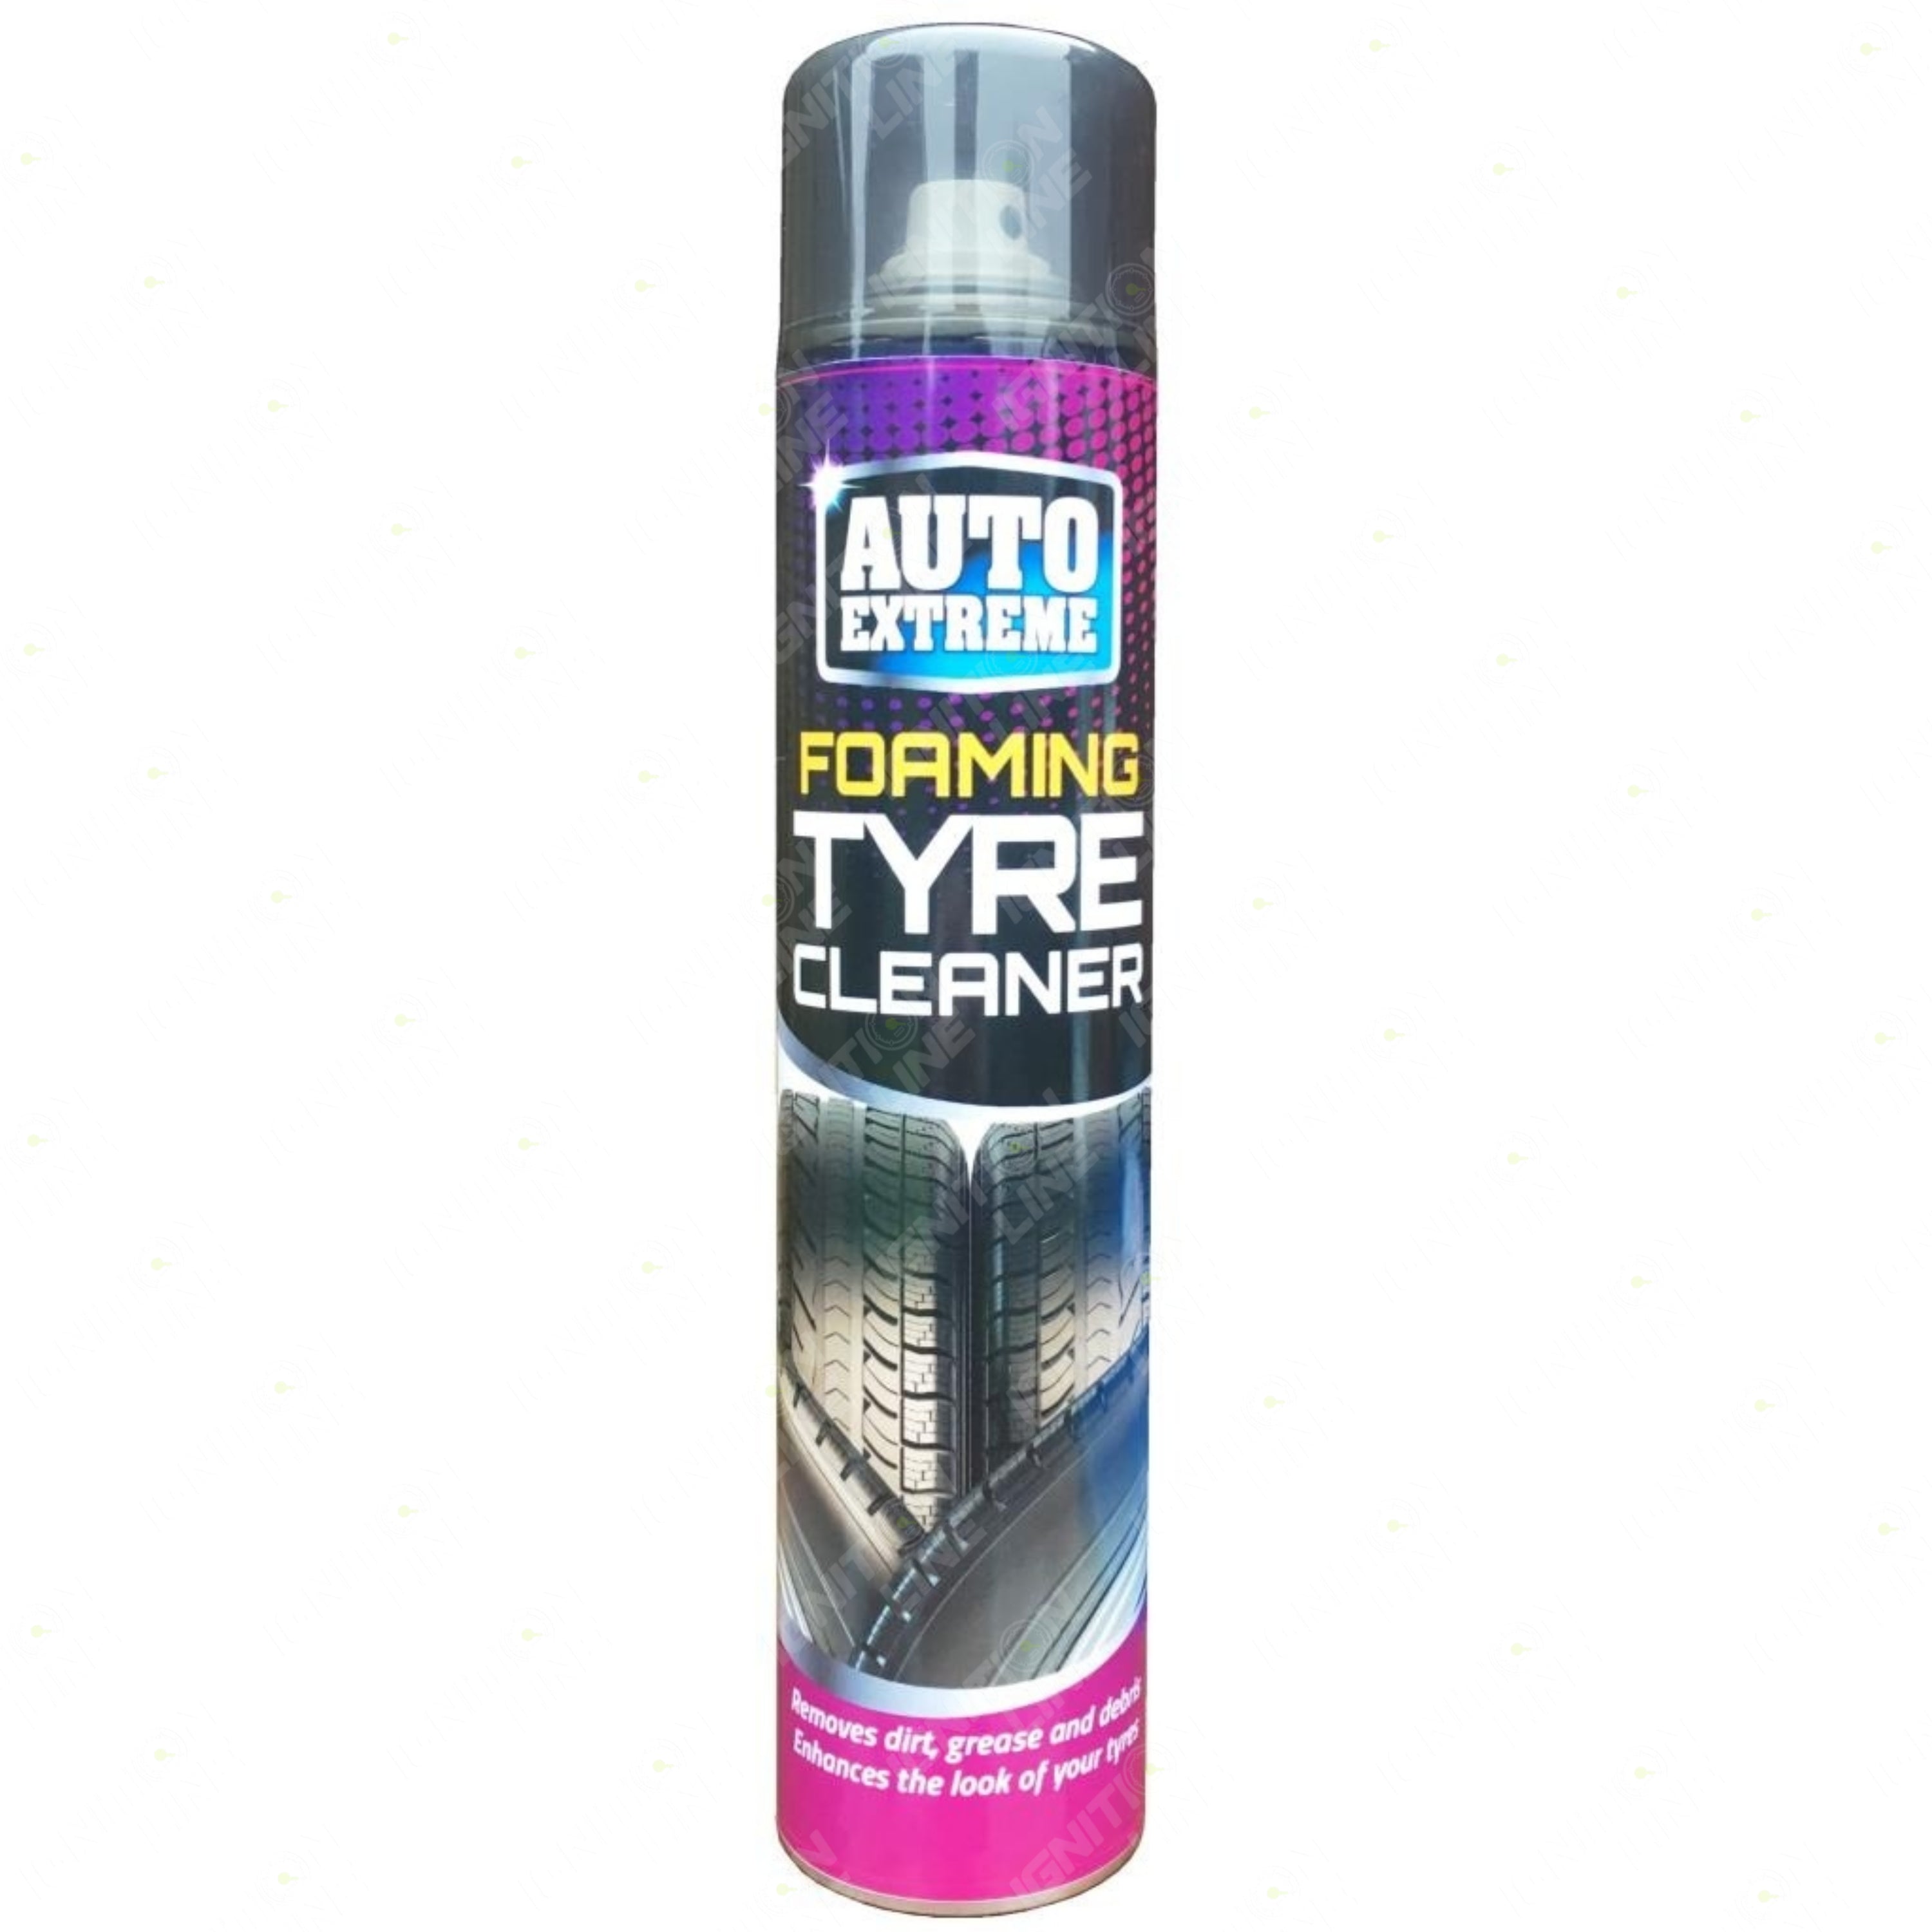 Auto Extreme Foaming Tyre Cleaner 300ml